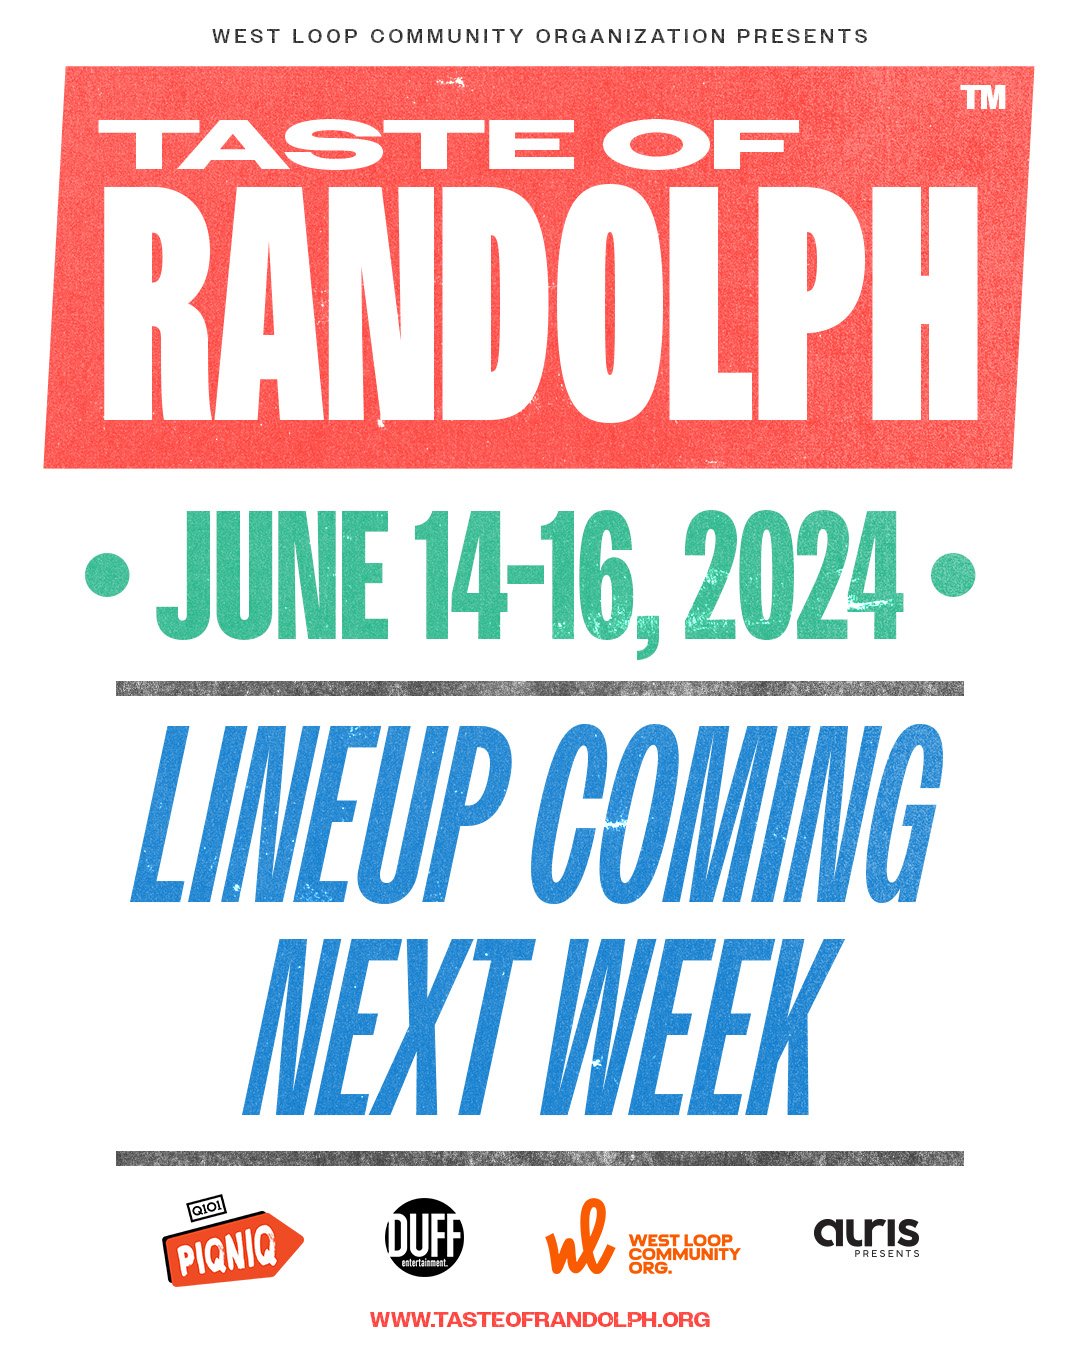 JUST ANNOUNCED! 

The 27th annual Taste of Randolph hosted by the West Loop Community Organization will be returning June 14-16th!

#tasteofrandolph2024 #tasteofrandolph #westloop #streetfestivals #chicago #ChicagoIL #chicagoillinois #thingstodoinchi